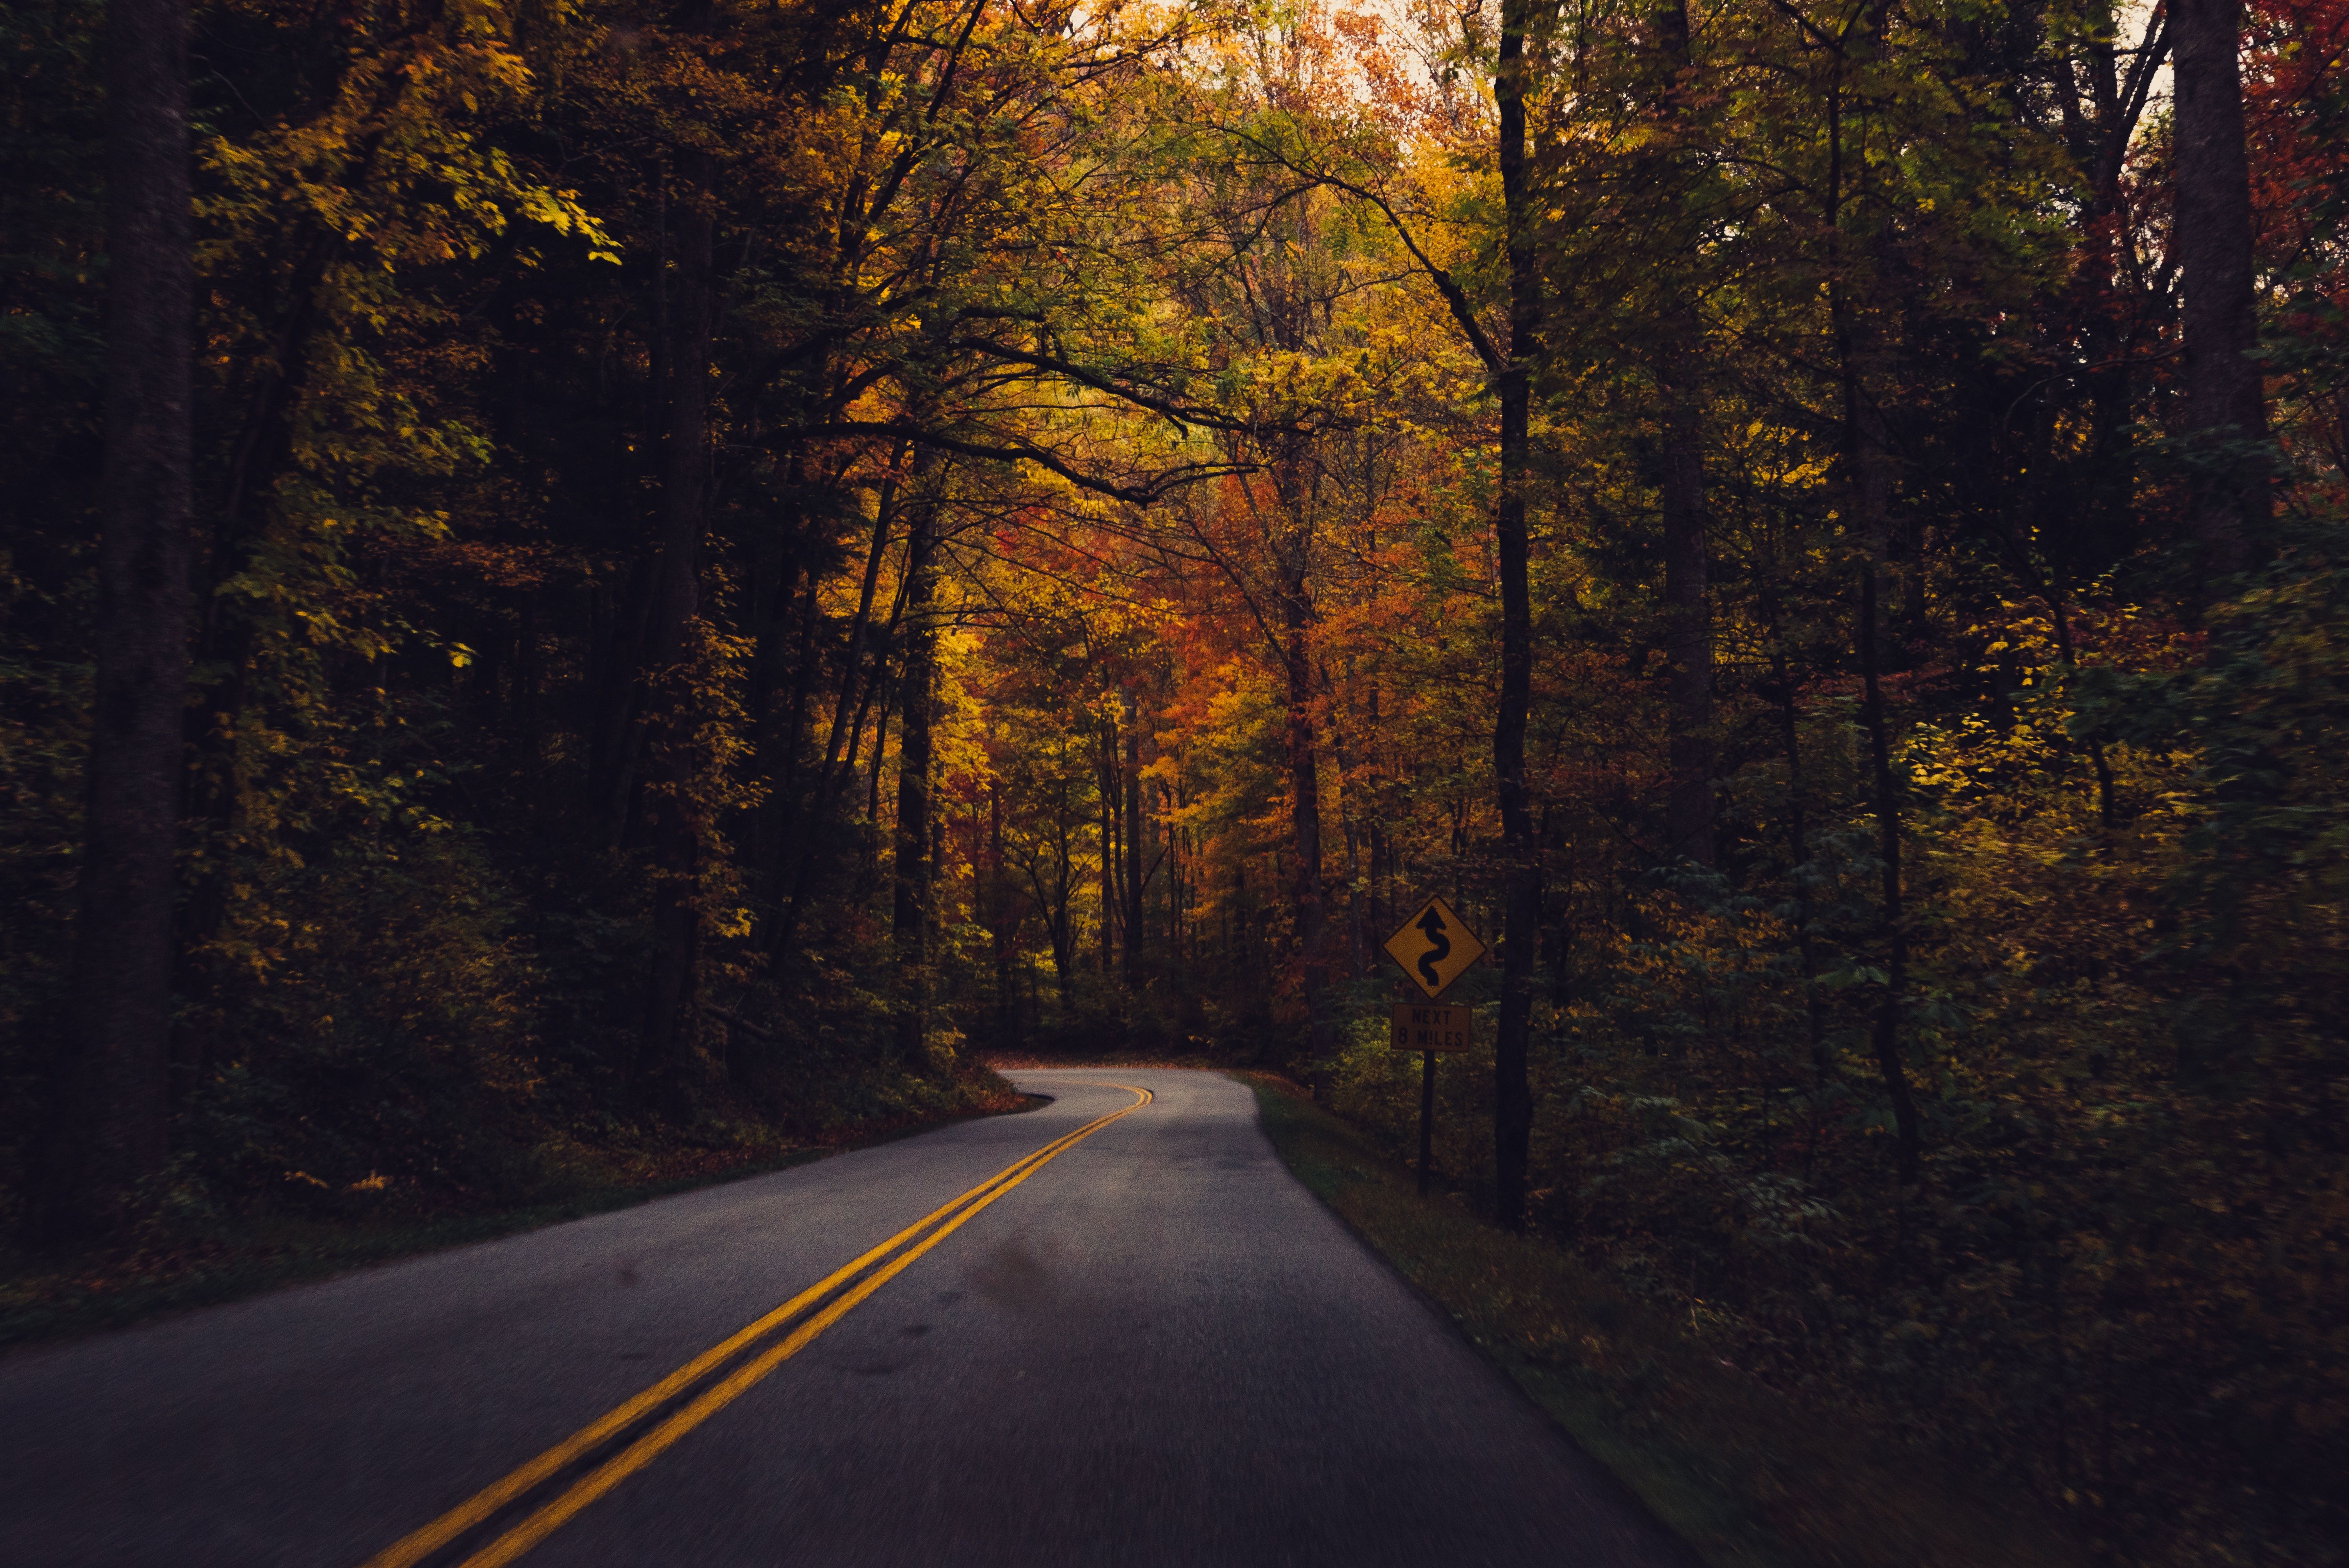 5871x3919 #green, #road line, #yellow, #autumn, #road, #wind, #turn, #street, #curve, #mountain road, #windy road, #tarmac, #wallpaper, #fall, #forest, #fall vibe, #mountainside, #highway, #Free picture, #wood, #tree. Mocah HD Wallpaper